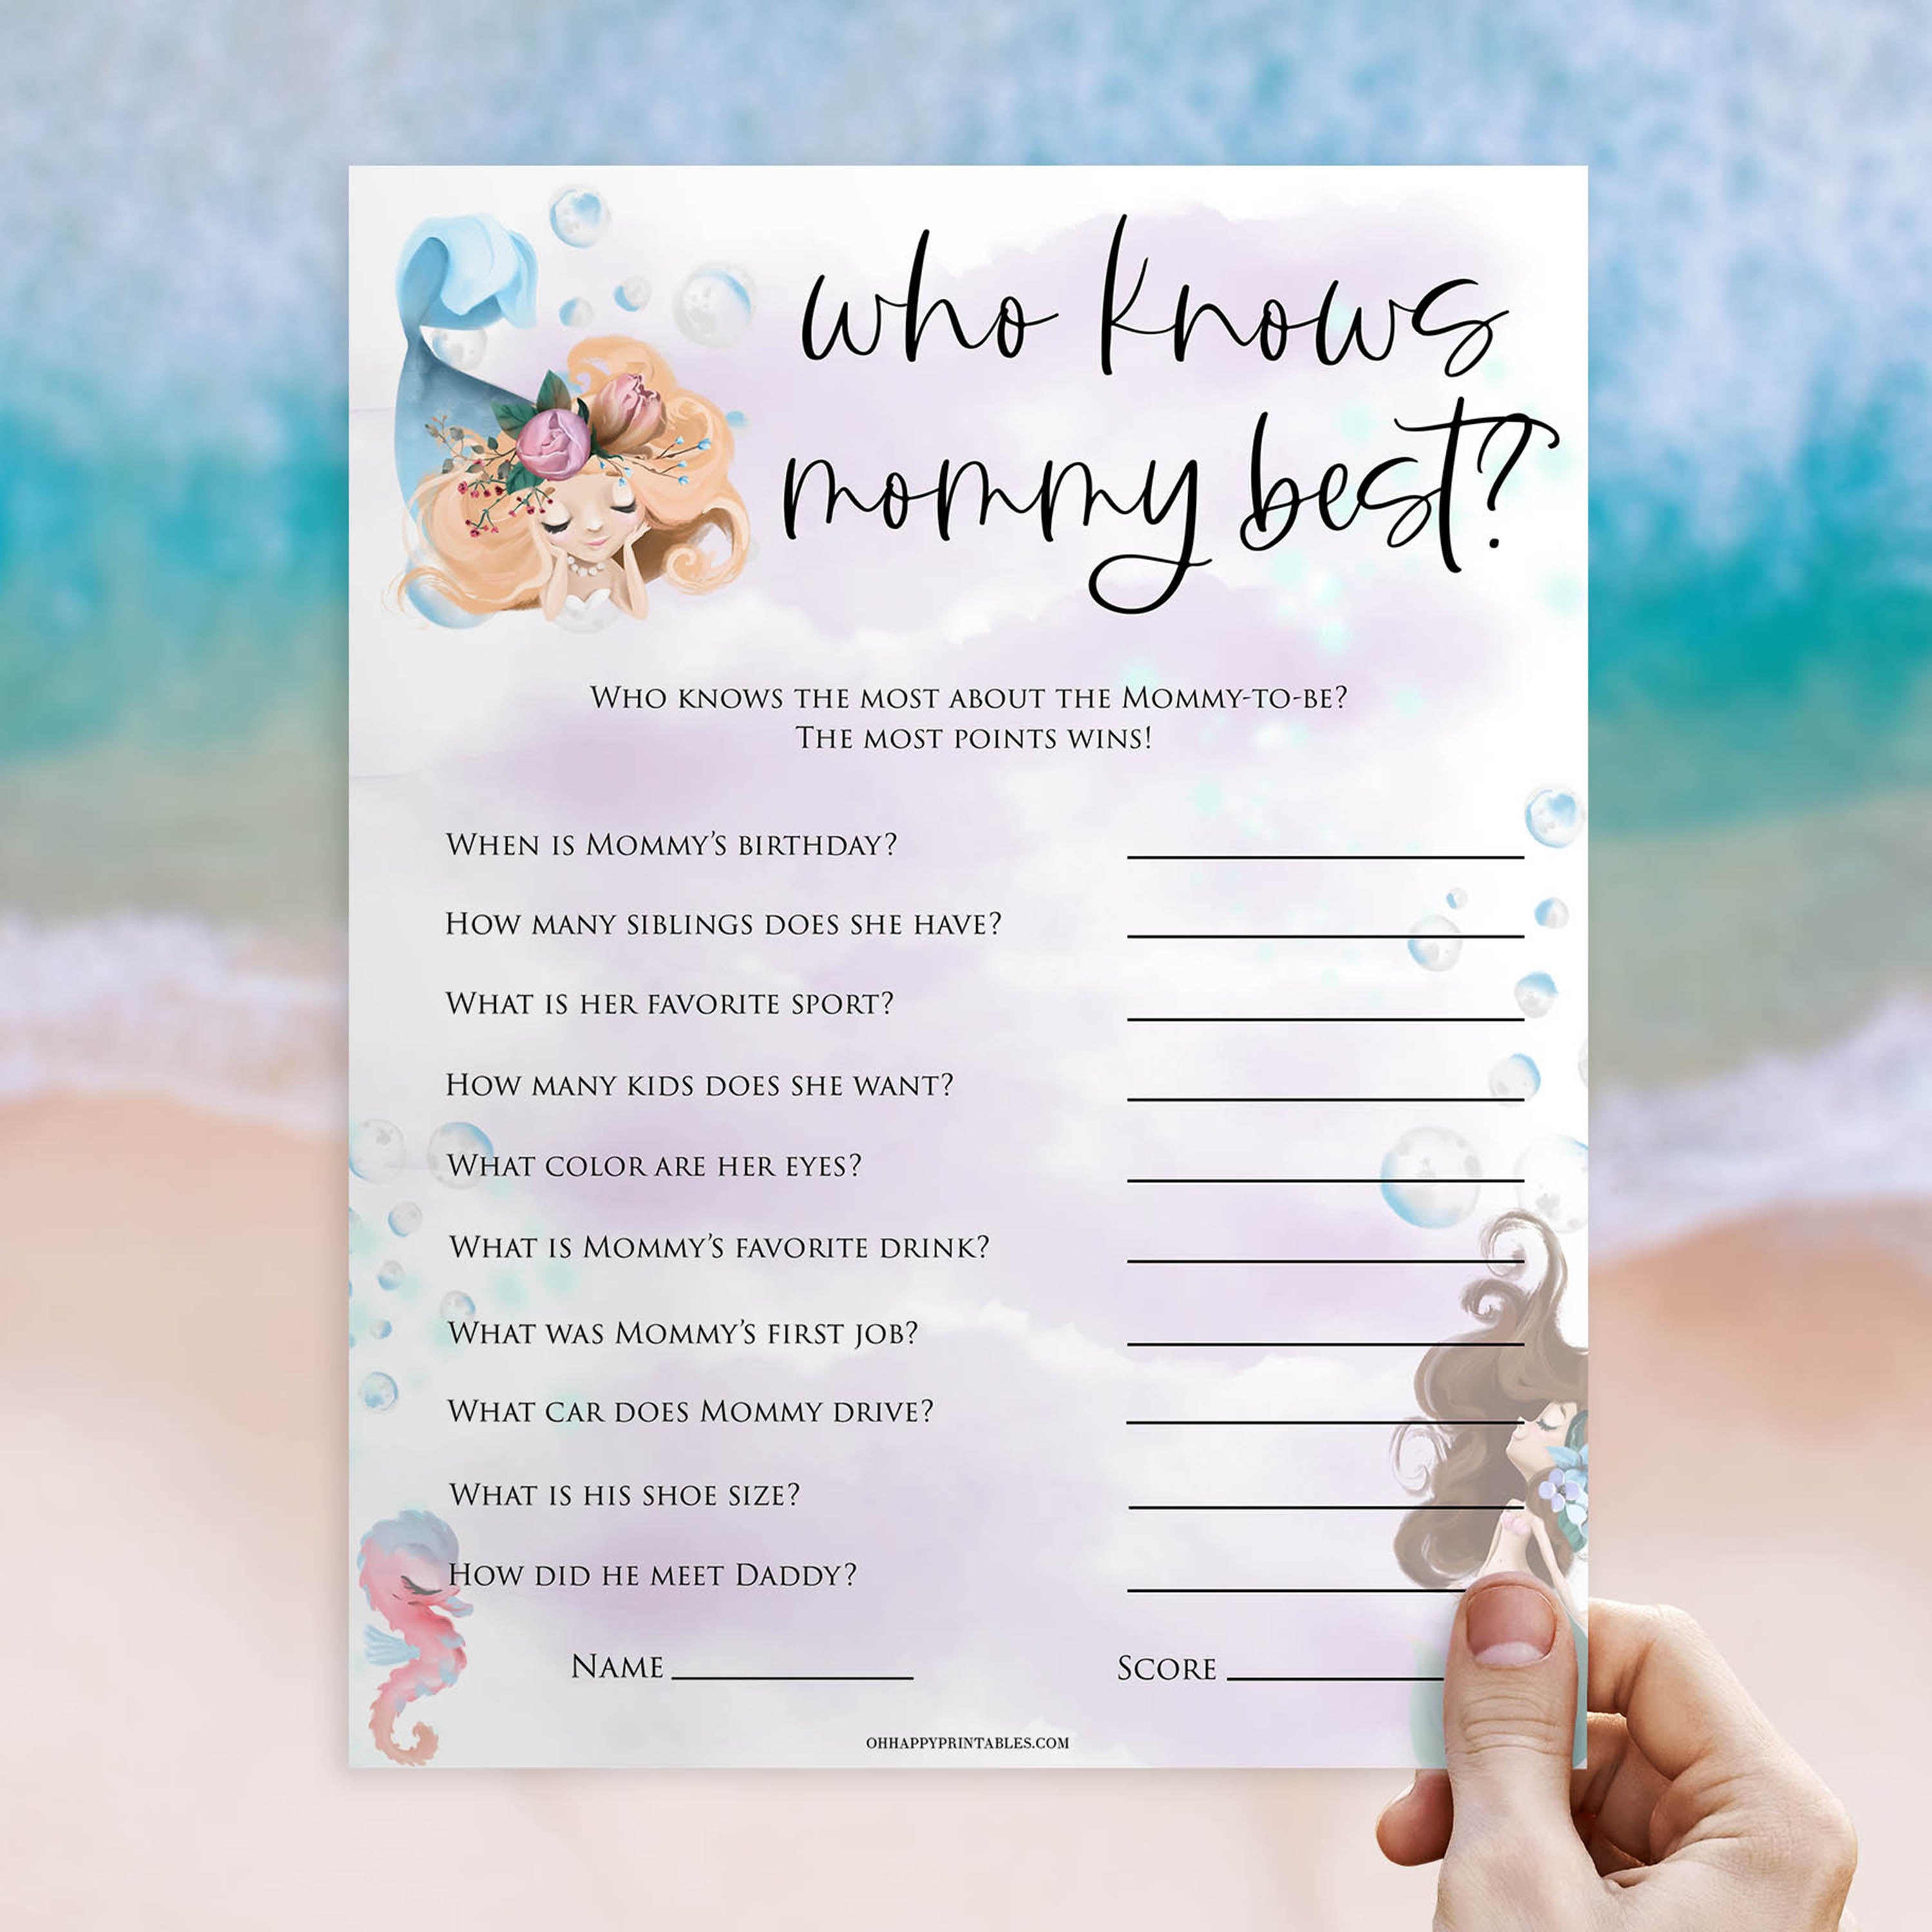 who knows mommy best baby game, Printable baby shower games, little mermaid baby games, baby shower games, fun baby shower ideas, top baby shower ideas, little mermaid baby shower, baby shower games, pink hearts baby shower ideas